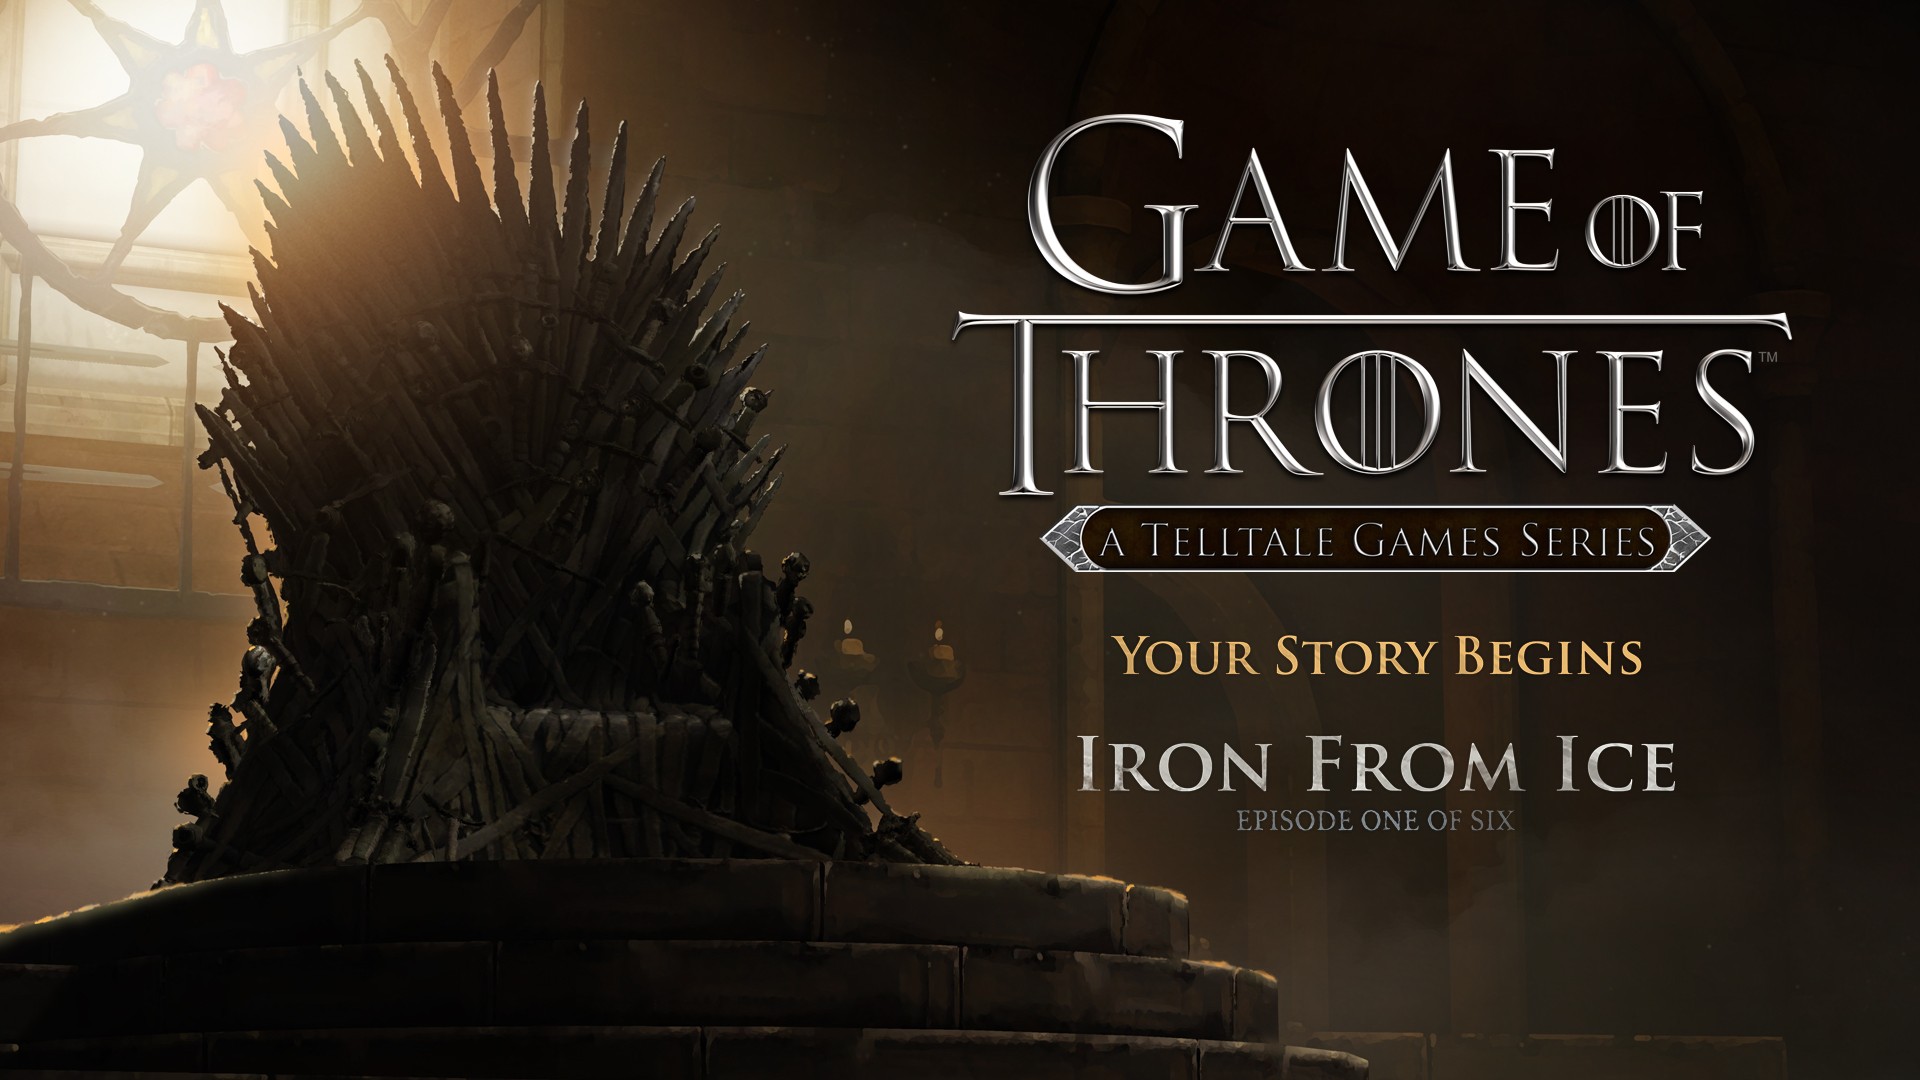 jaquette du jeu vidéo Game of Thrones : Episode 1 - Iron from Ice